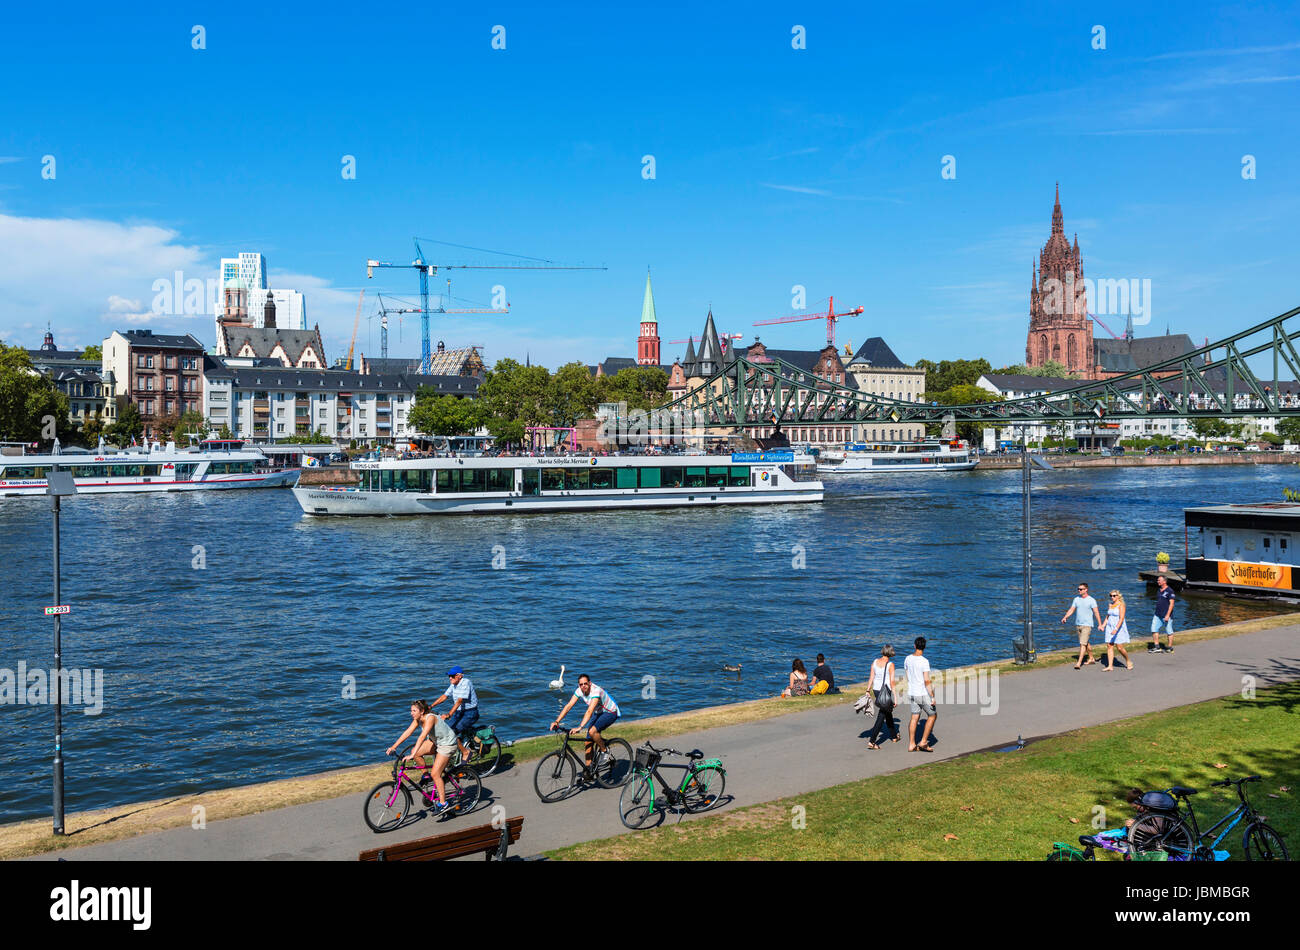 View towards Frankfurt Cathedral (Frankfurter Dom) and the Altstadt from the banks of the River Main, Frankfurt, Hesse, Germany Stock Photo